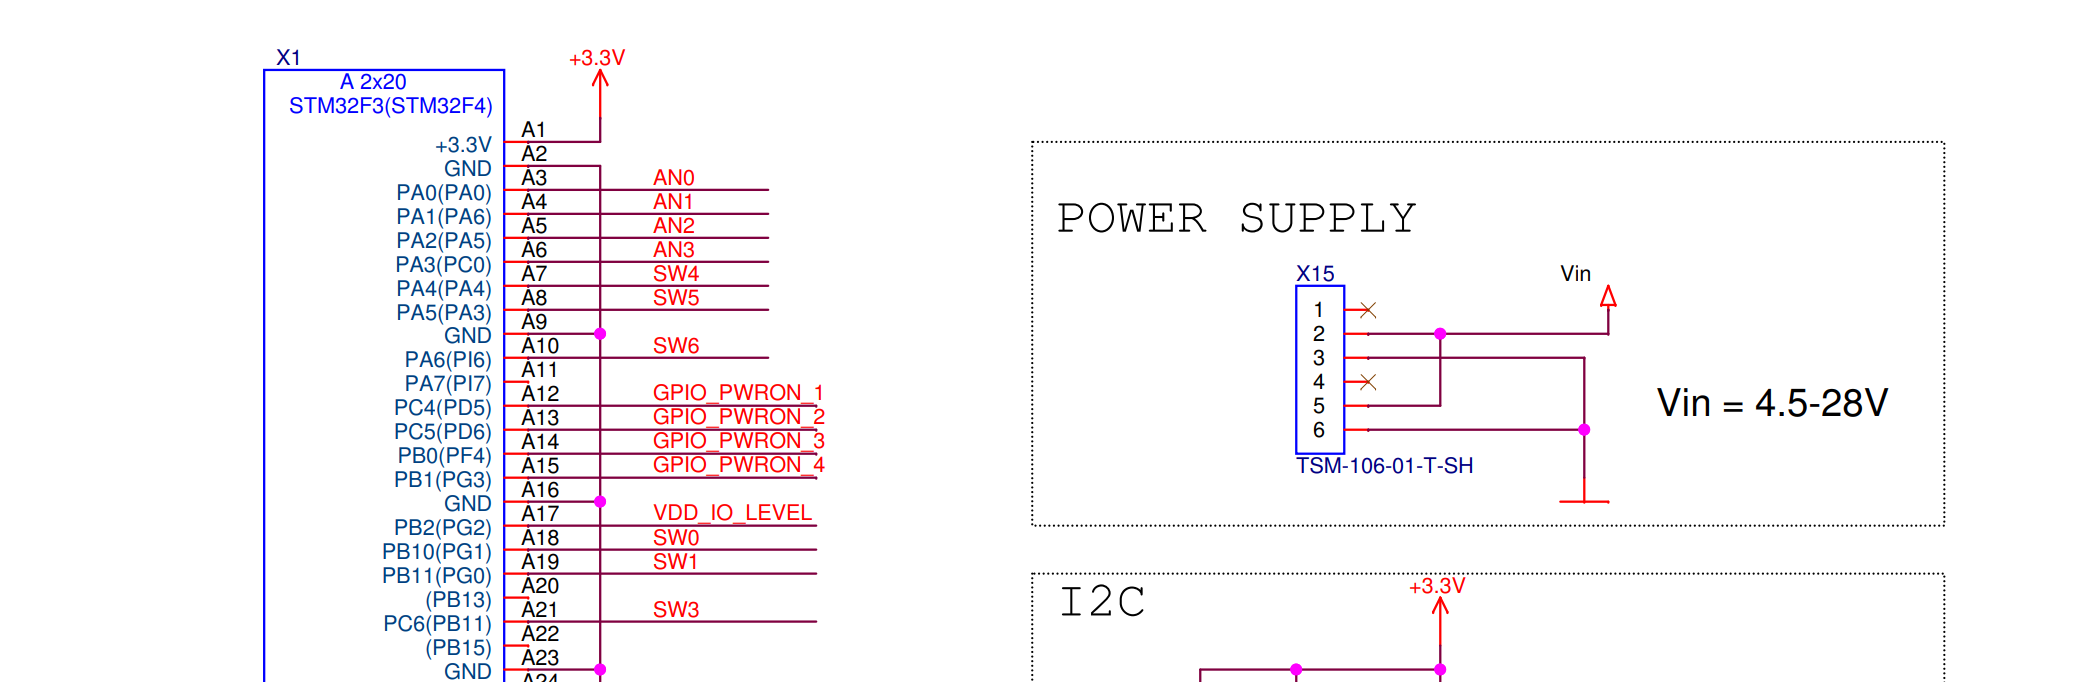 https://www.canedudev.com/rover/_images/io-board-power.png